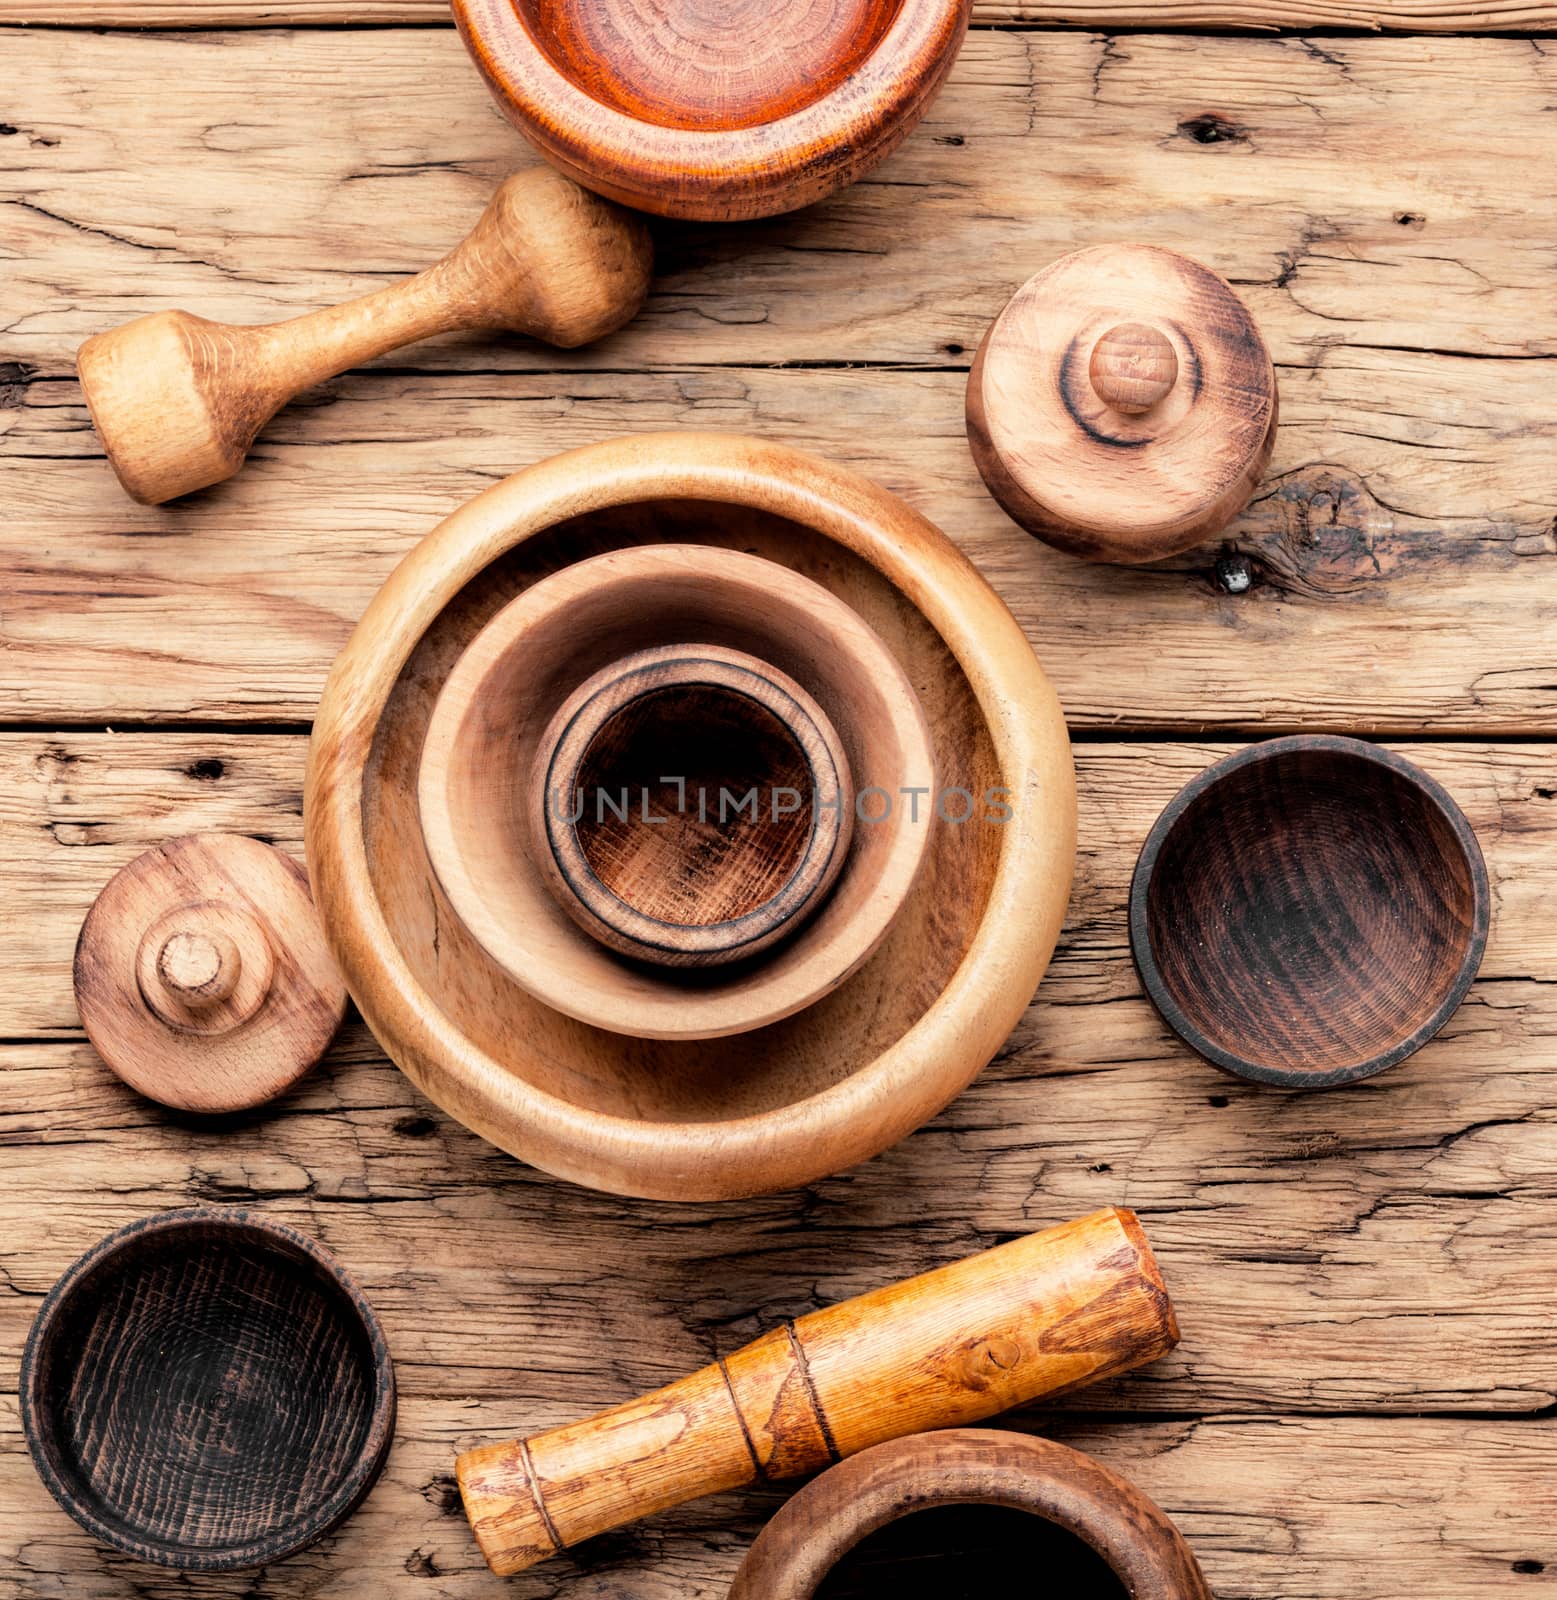 Empty wooden mortar and pestle on wooden old background.Cooking utensils.Mortar with pestle